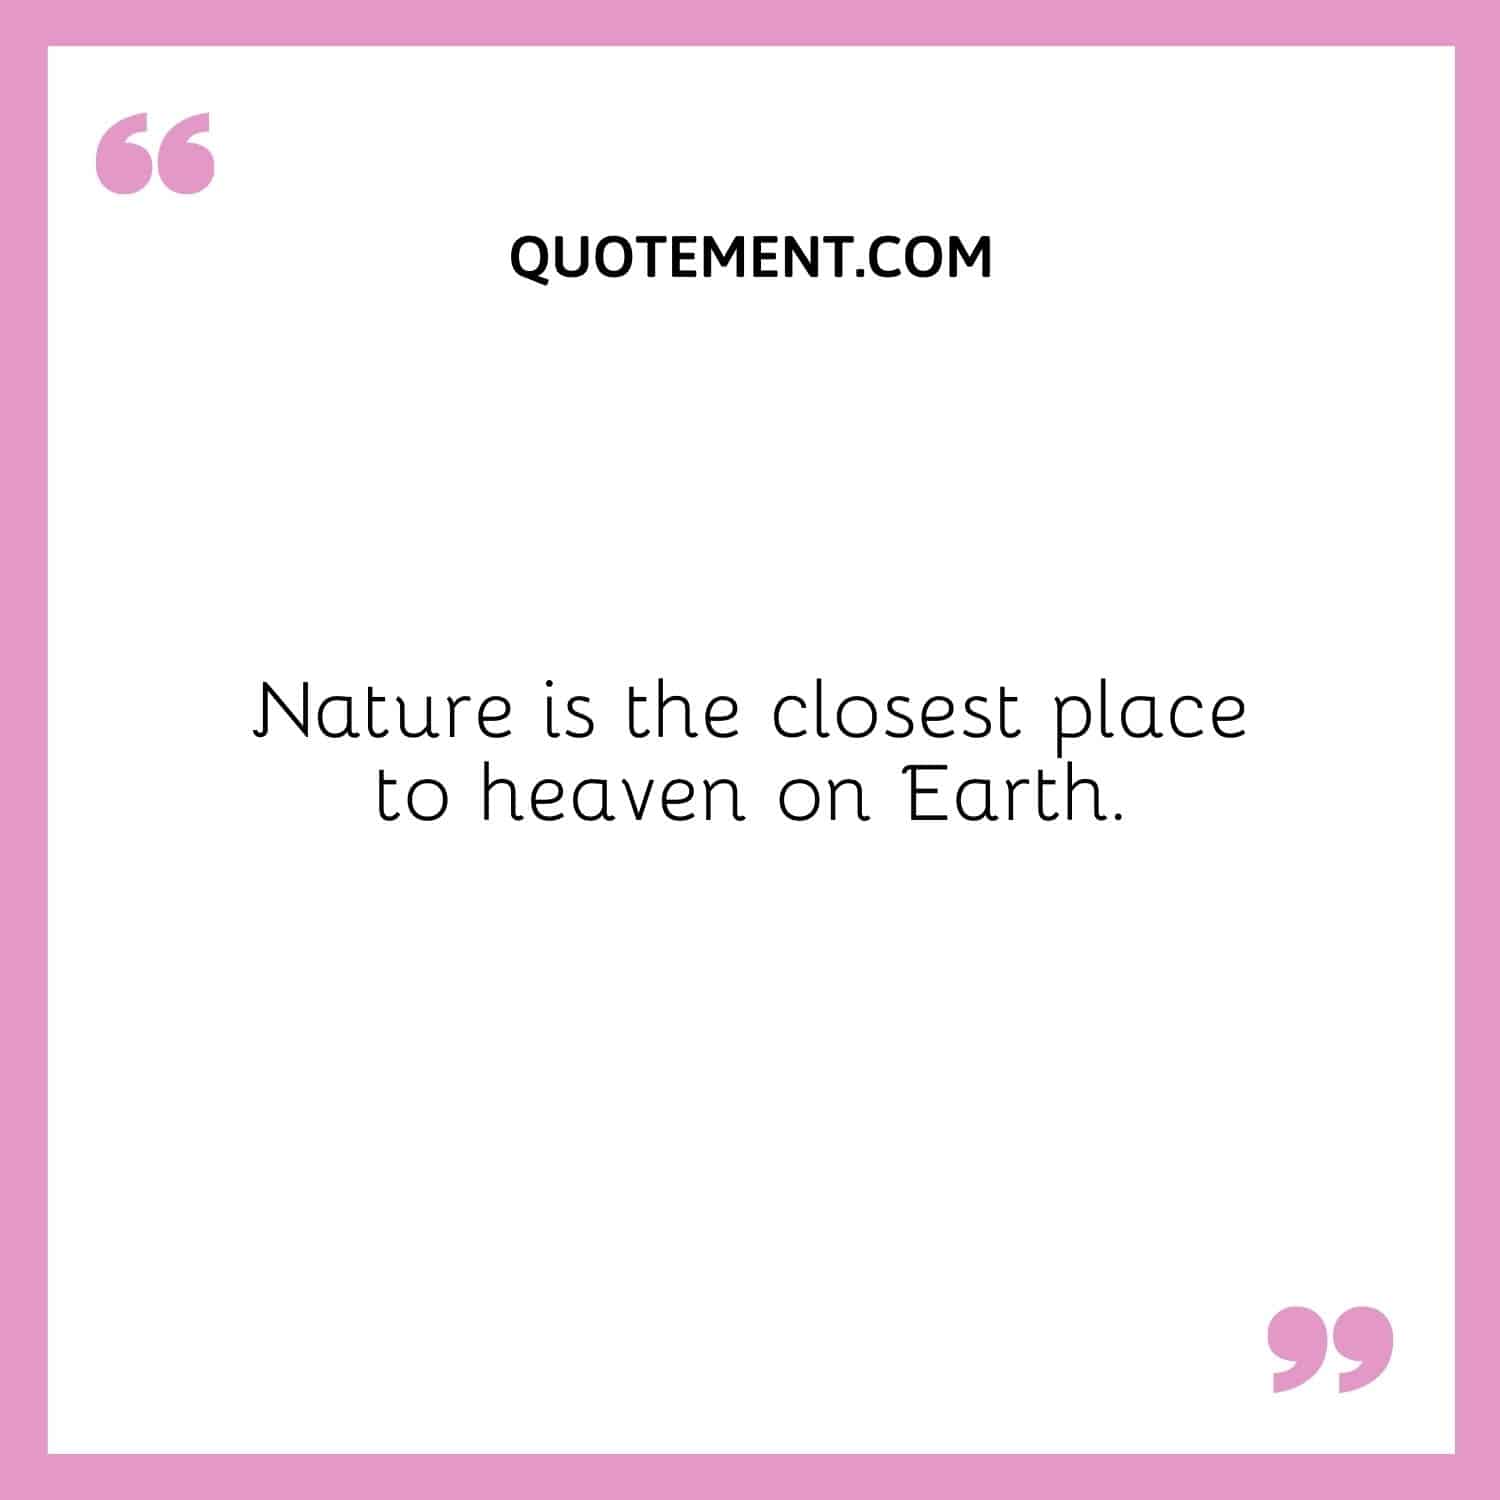 Nature is the closest place to heaven on Earth